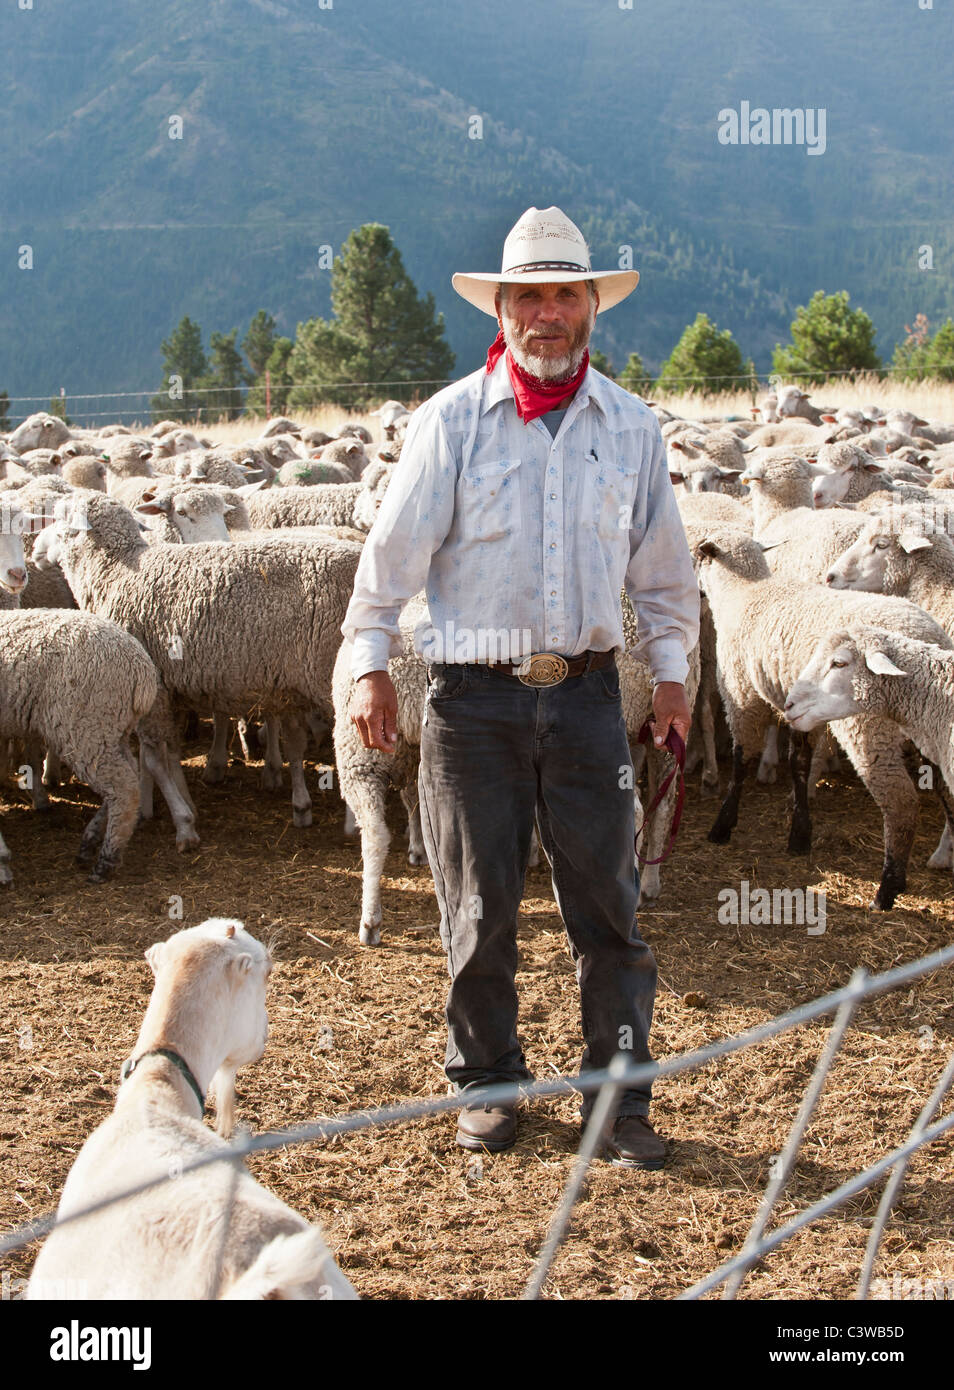 A sheep herder stands with his flock of sheep and goats. The animals eat noxious weeds on Mt. Jumbo in Missoula Montana. Stock Photo